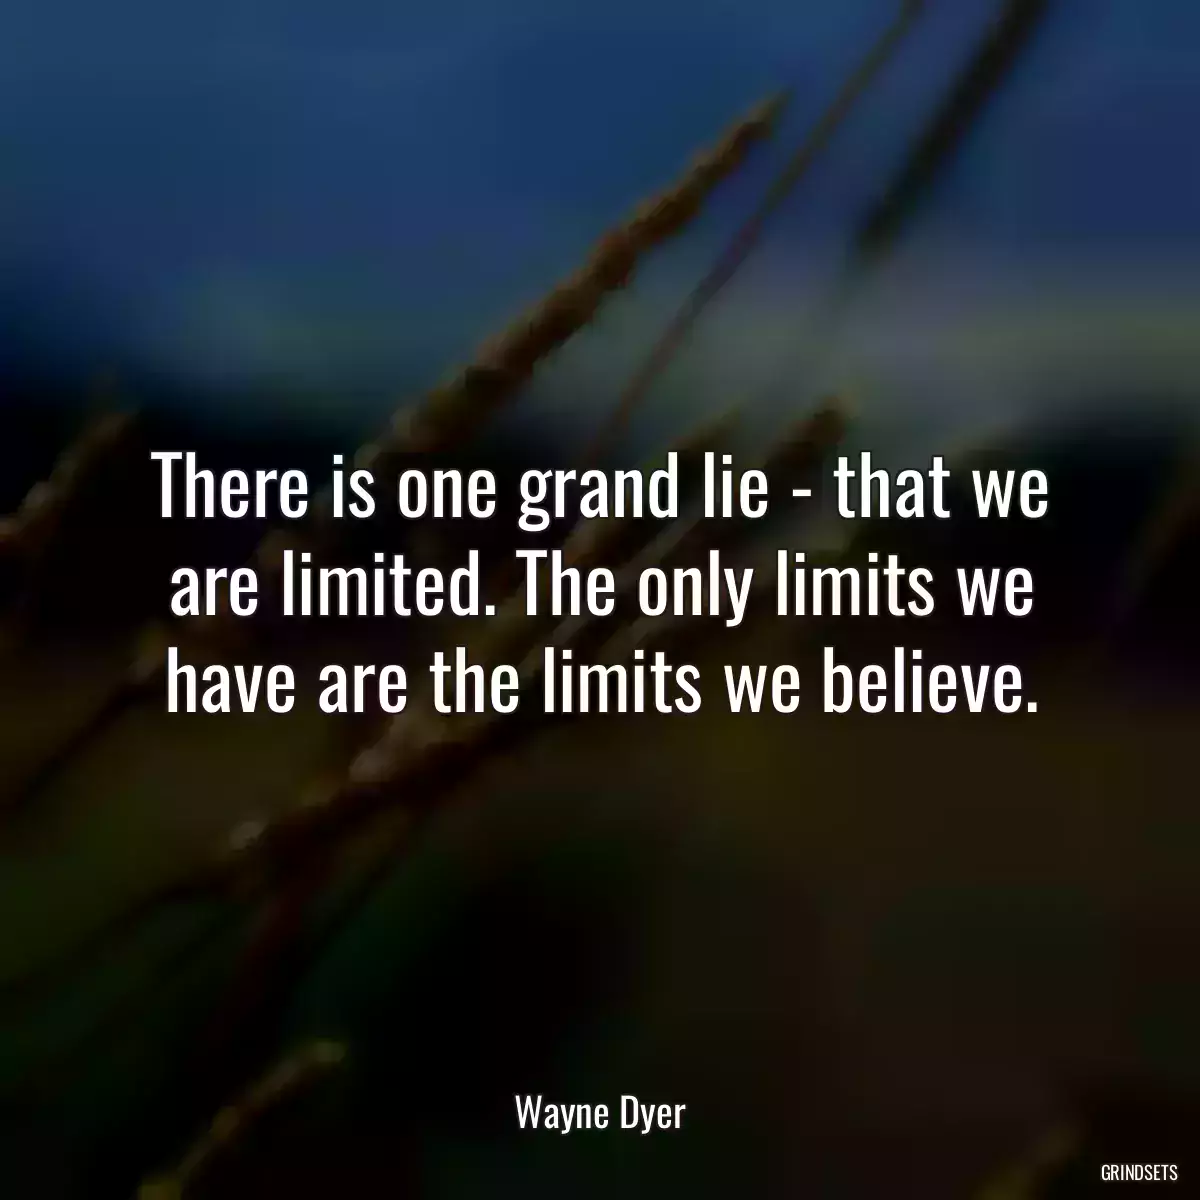 There is one grand lie - that we are limited. The only limits we have are the limits we believe.